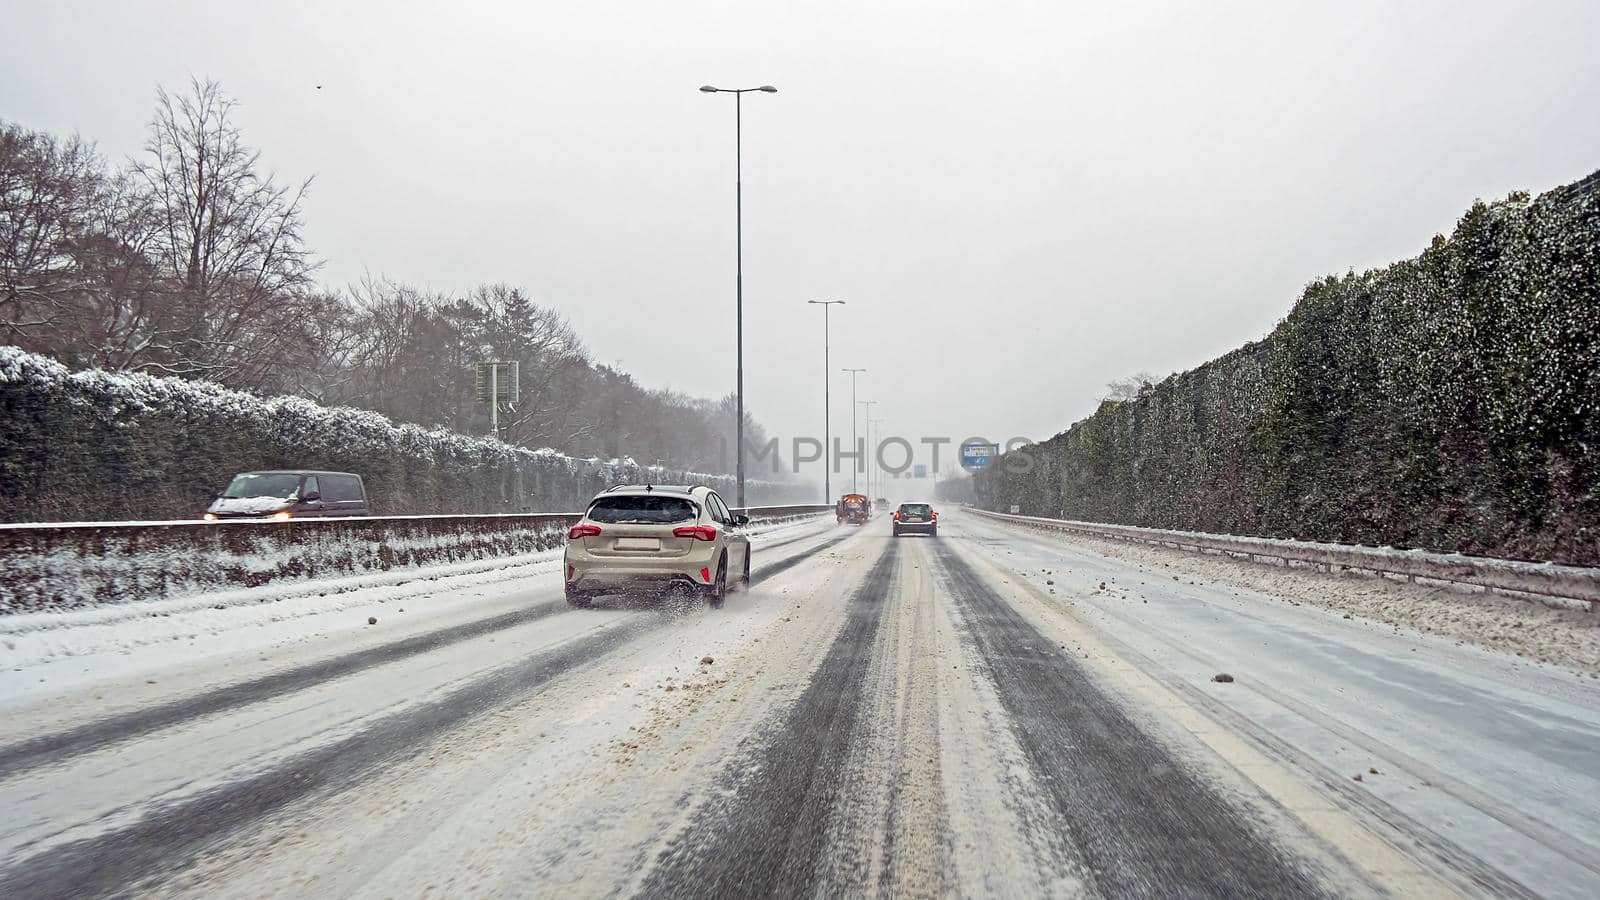 Driving on the highway A1 during a snowstorm in winter in the Netherlands by devy